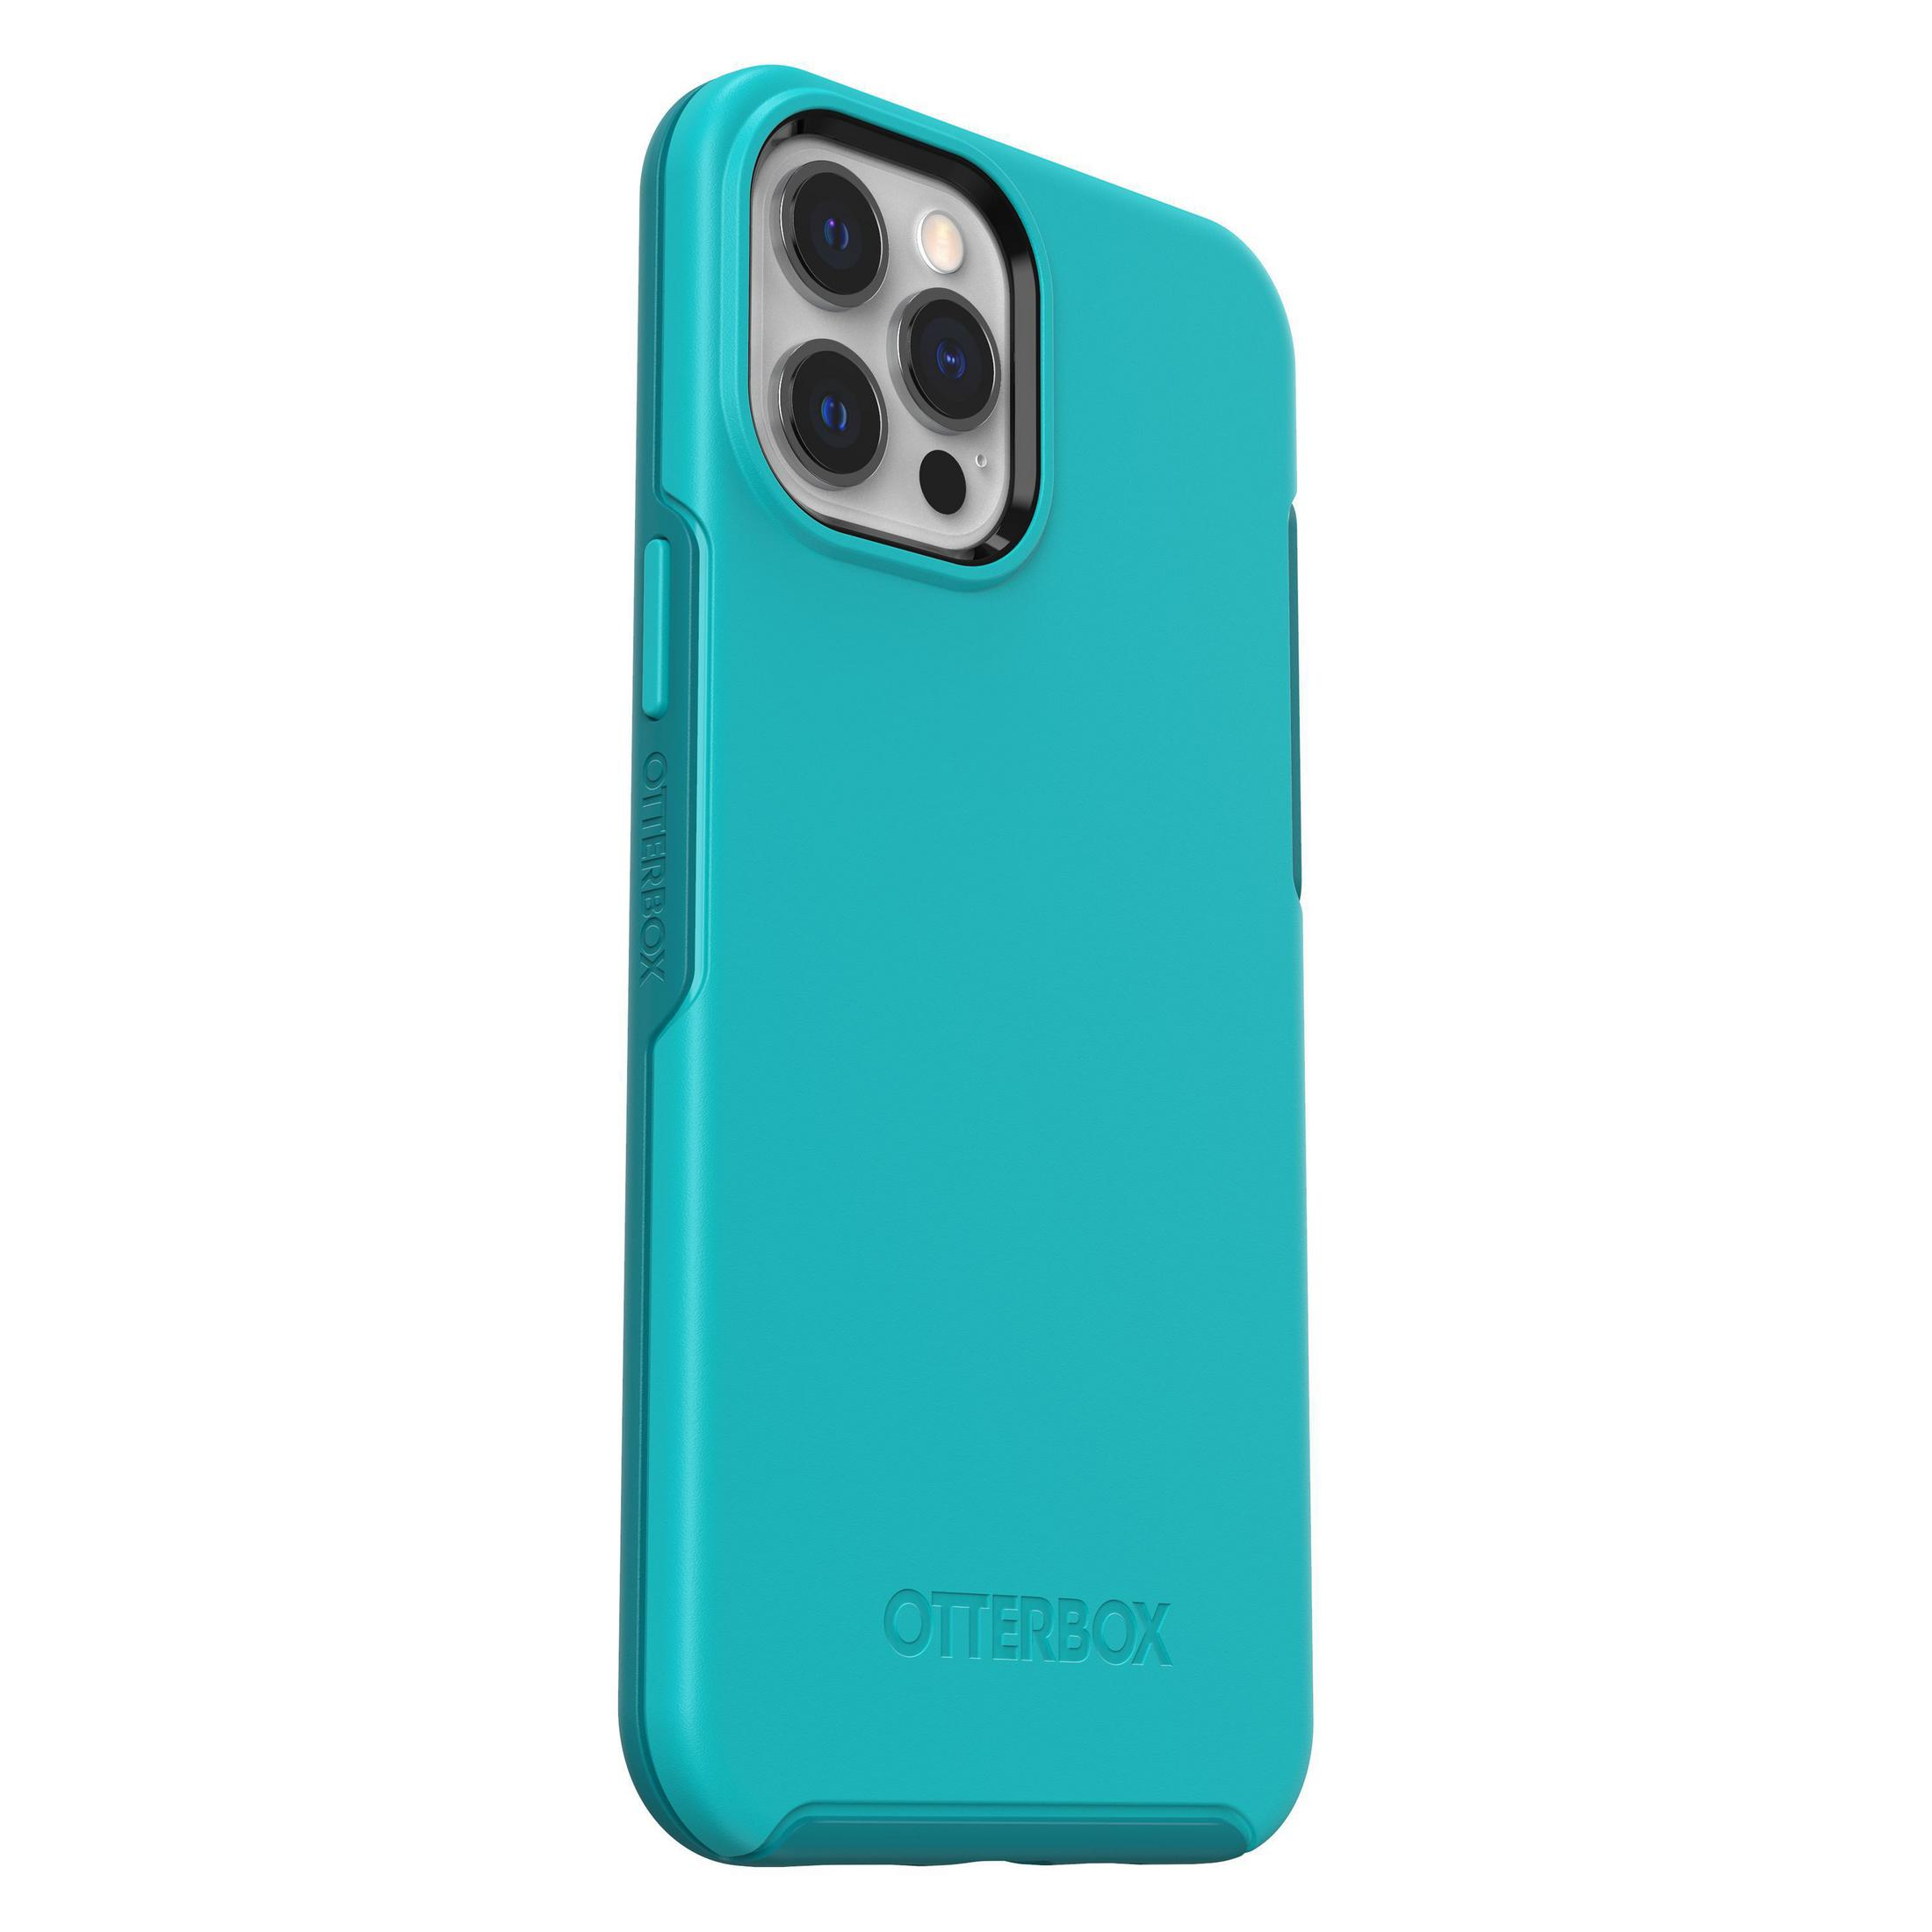 OTTERBOX 77-65466 SYMMETRY IP BLUE, Backcover, Blau ROCK MAX iPhone Pro CANDY 12 Max, 12 Apple, PRO